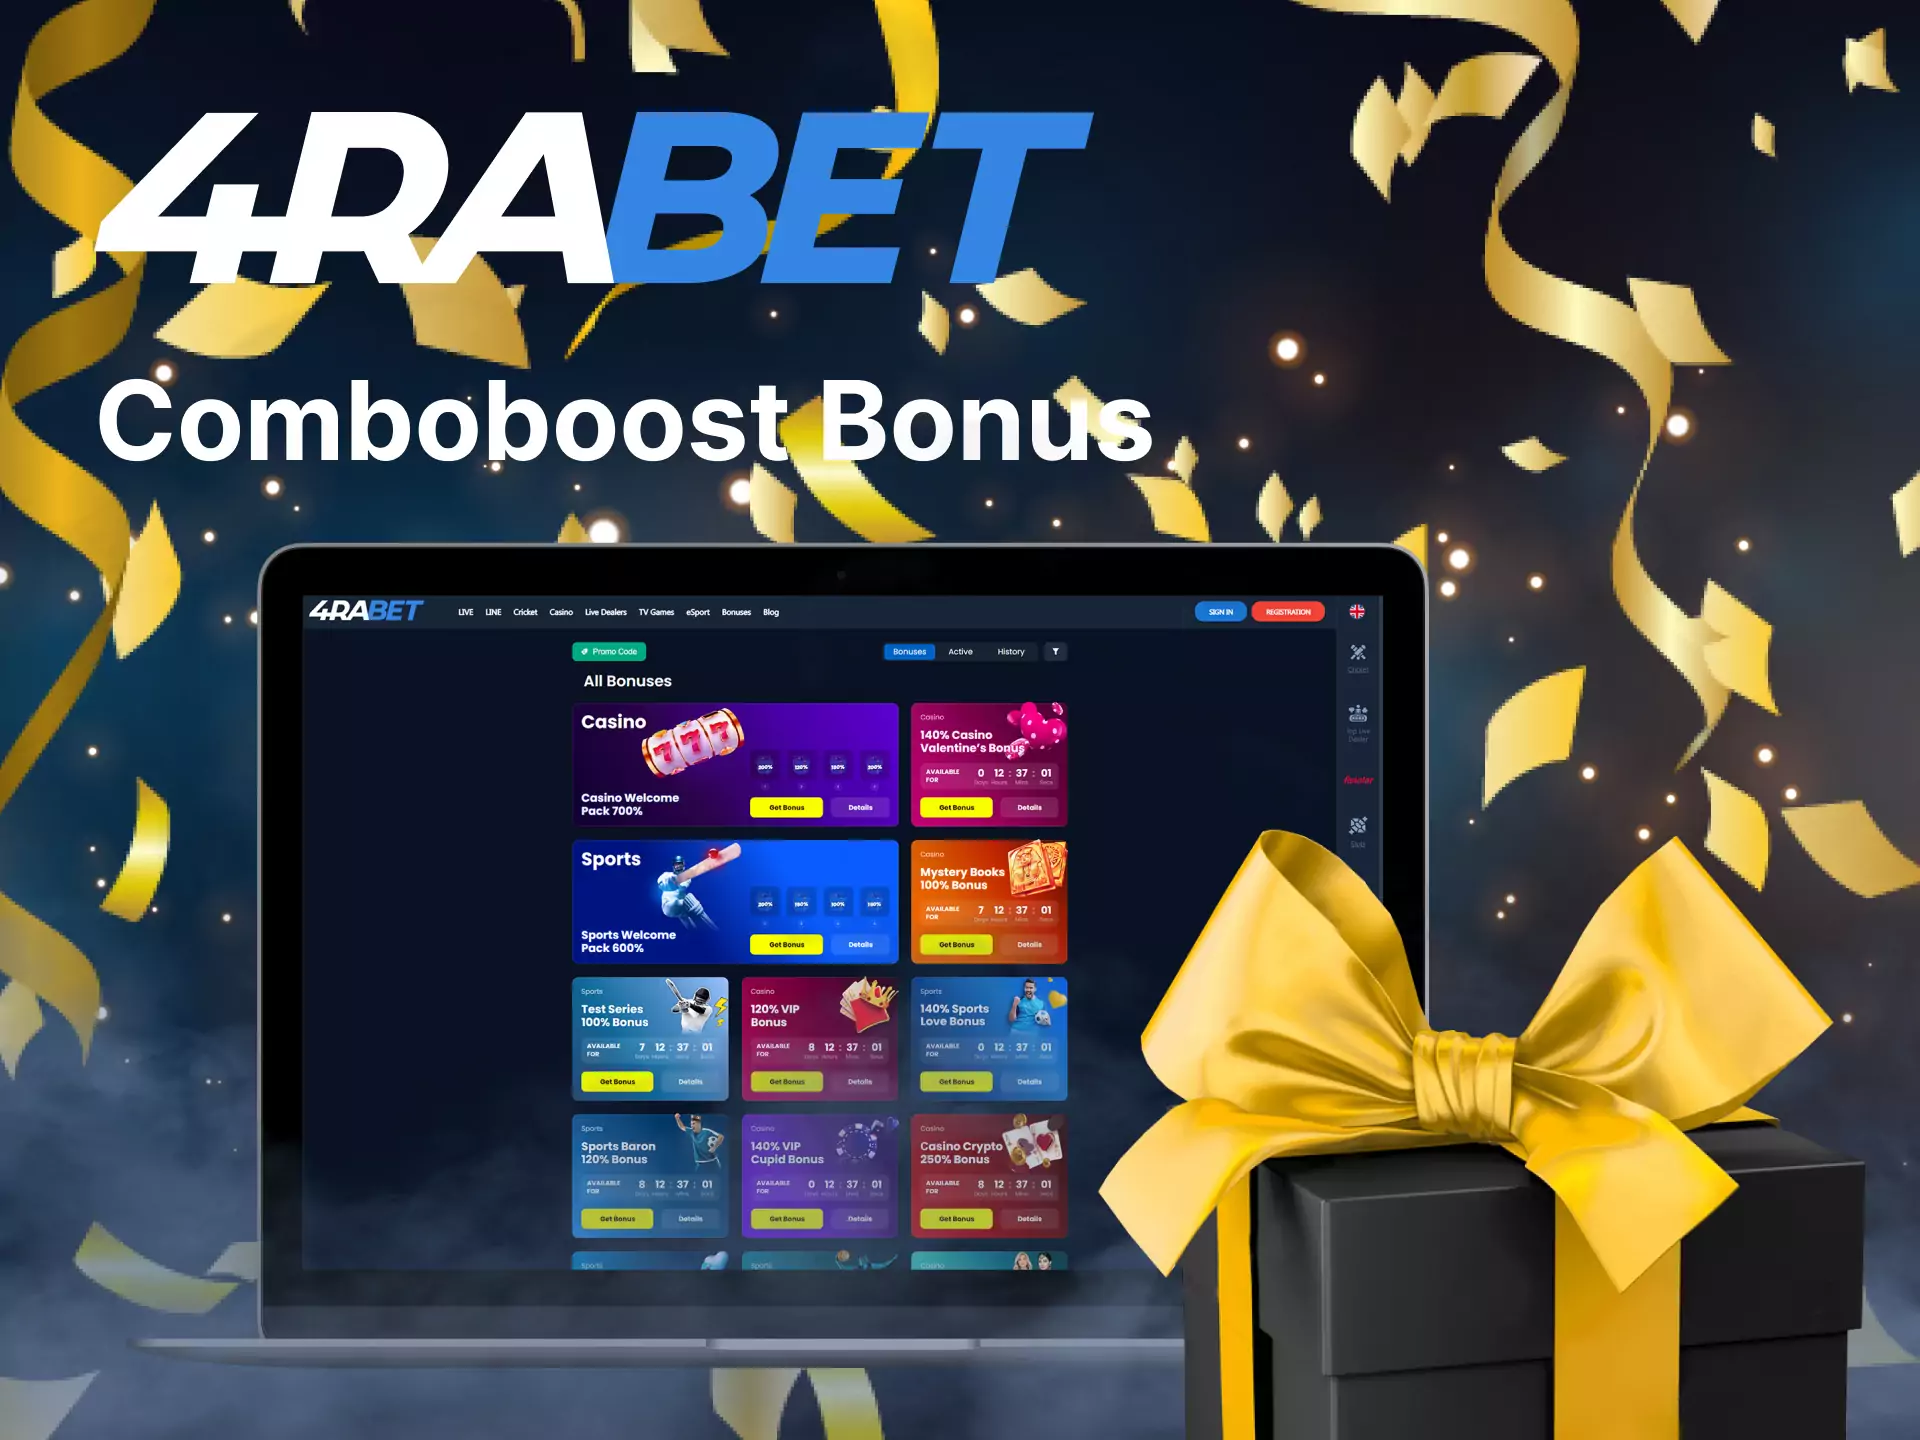 Get a special bonus for betting on multiple game results from 4rabet.